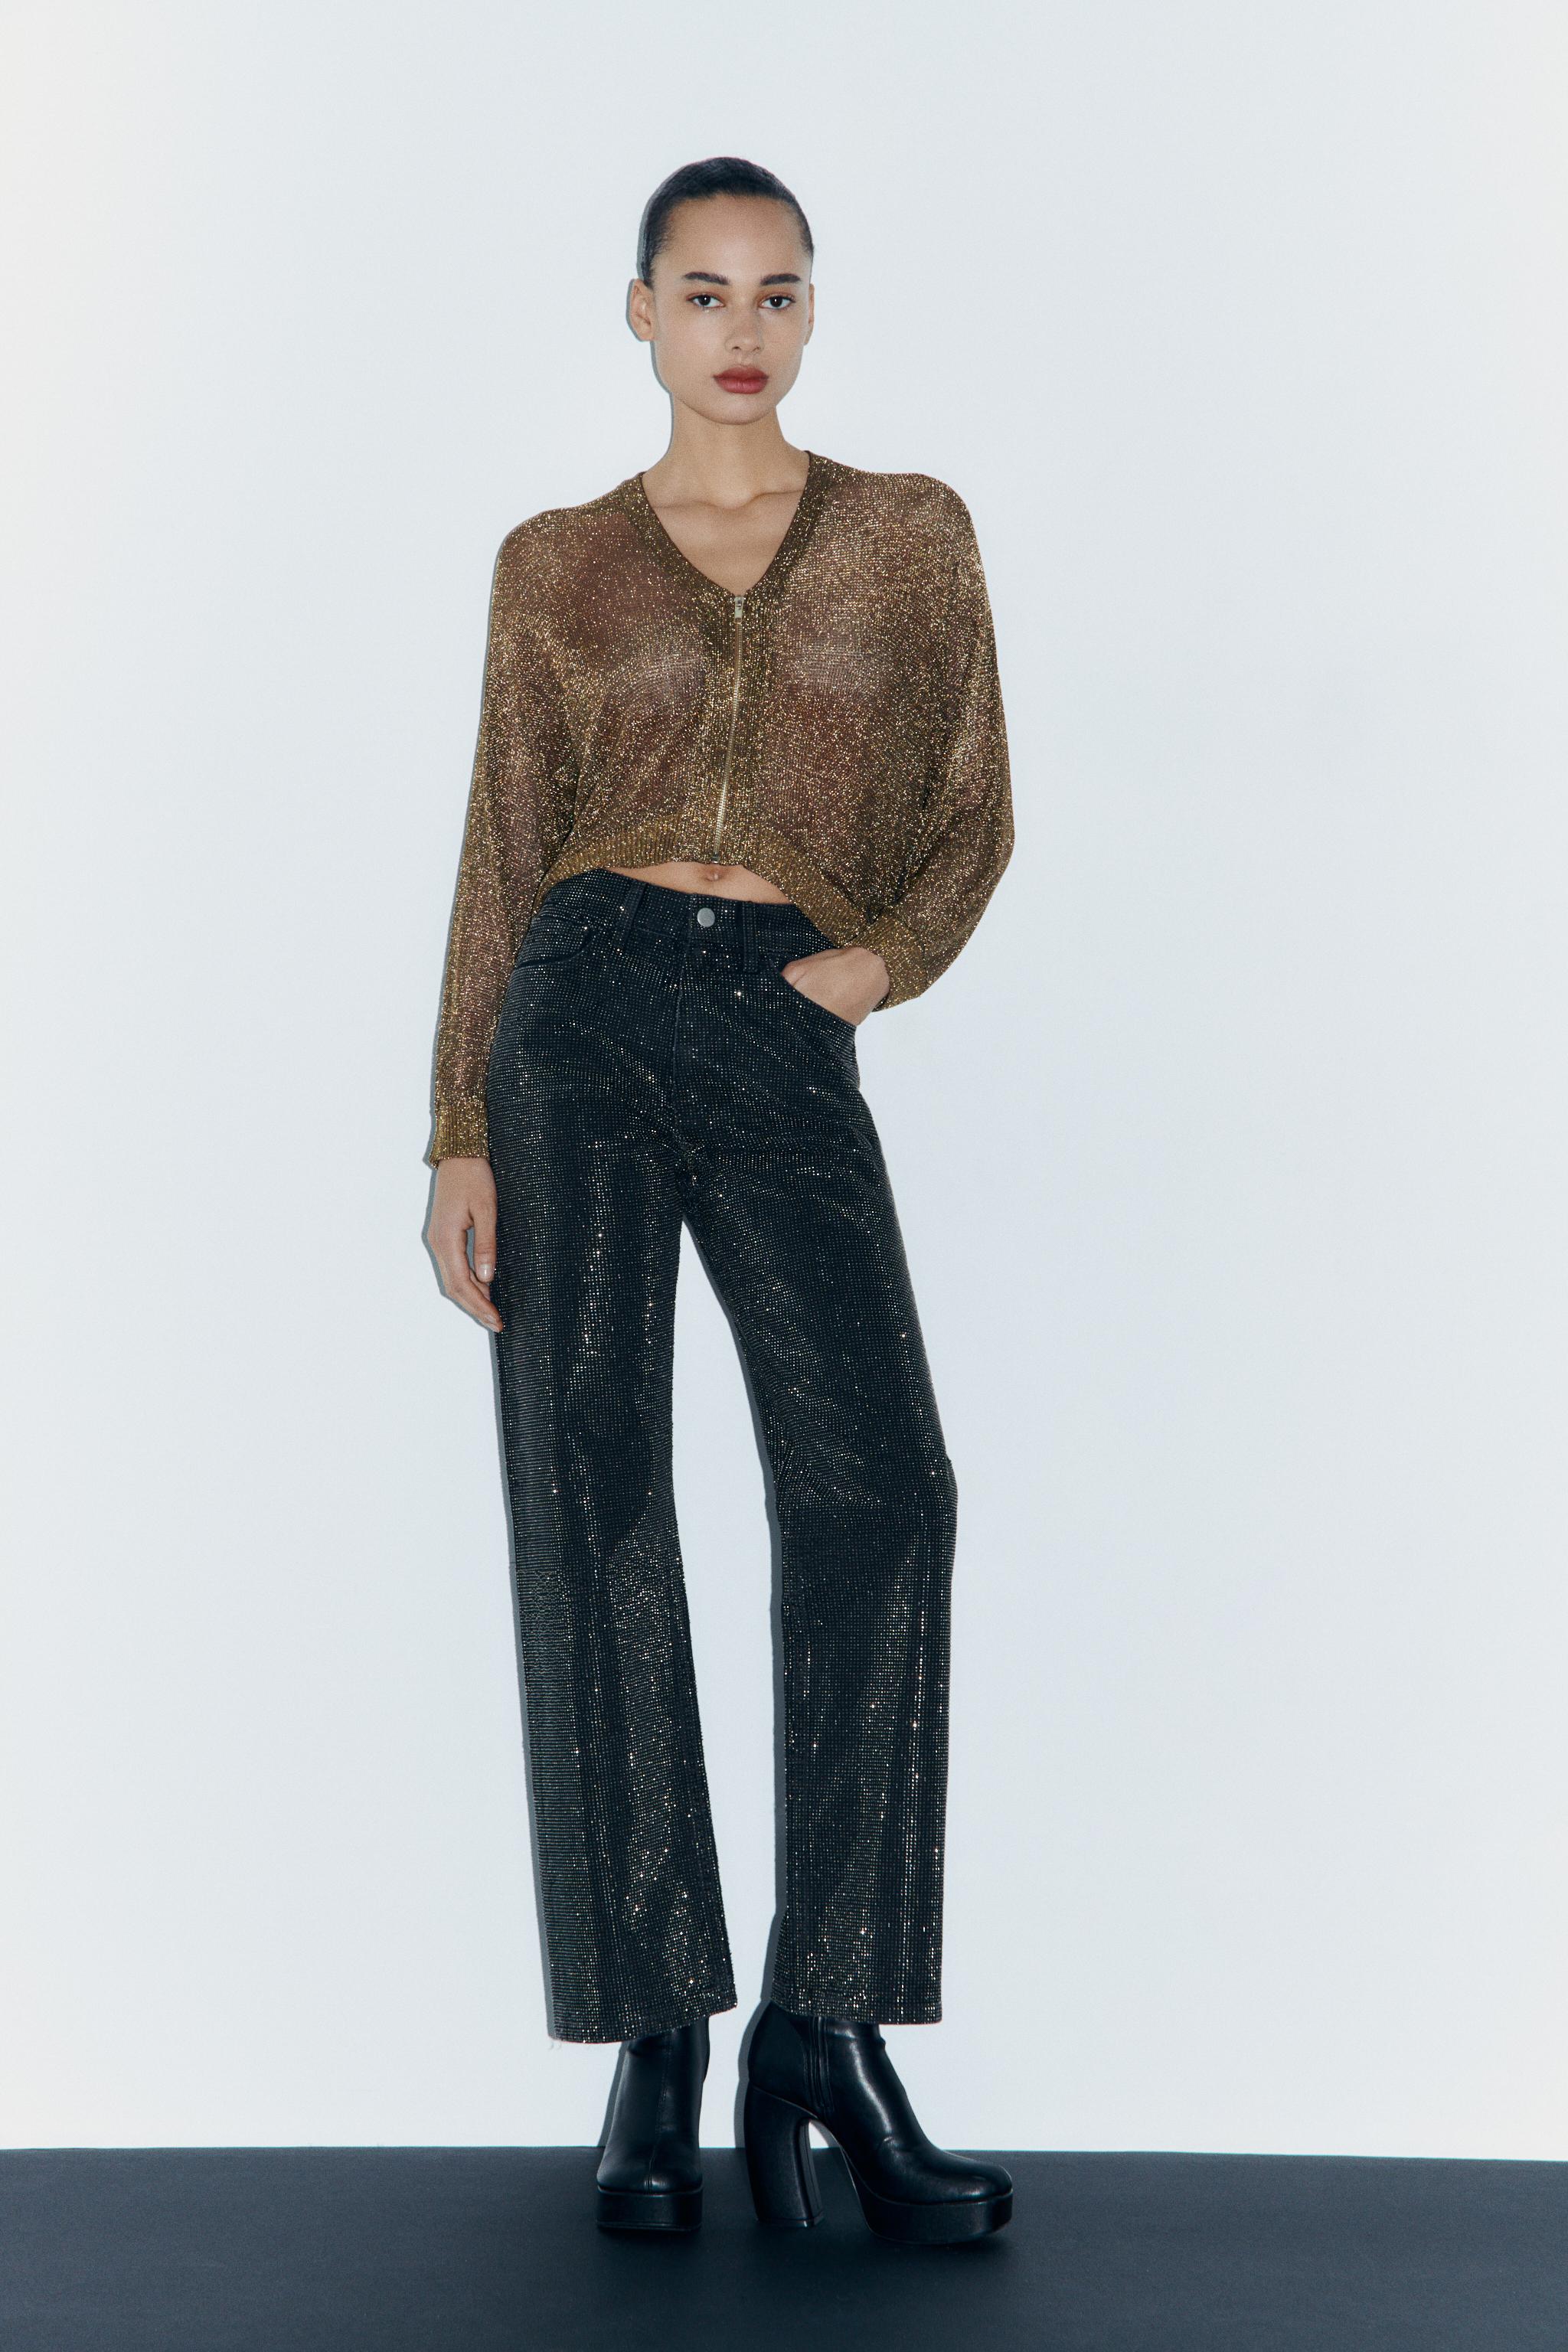 Black bolero jacket with camisole top and flared organza pants